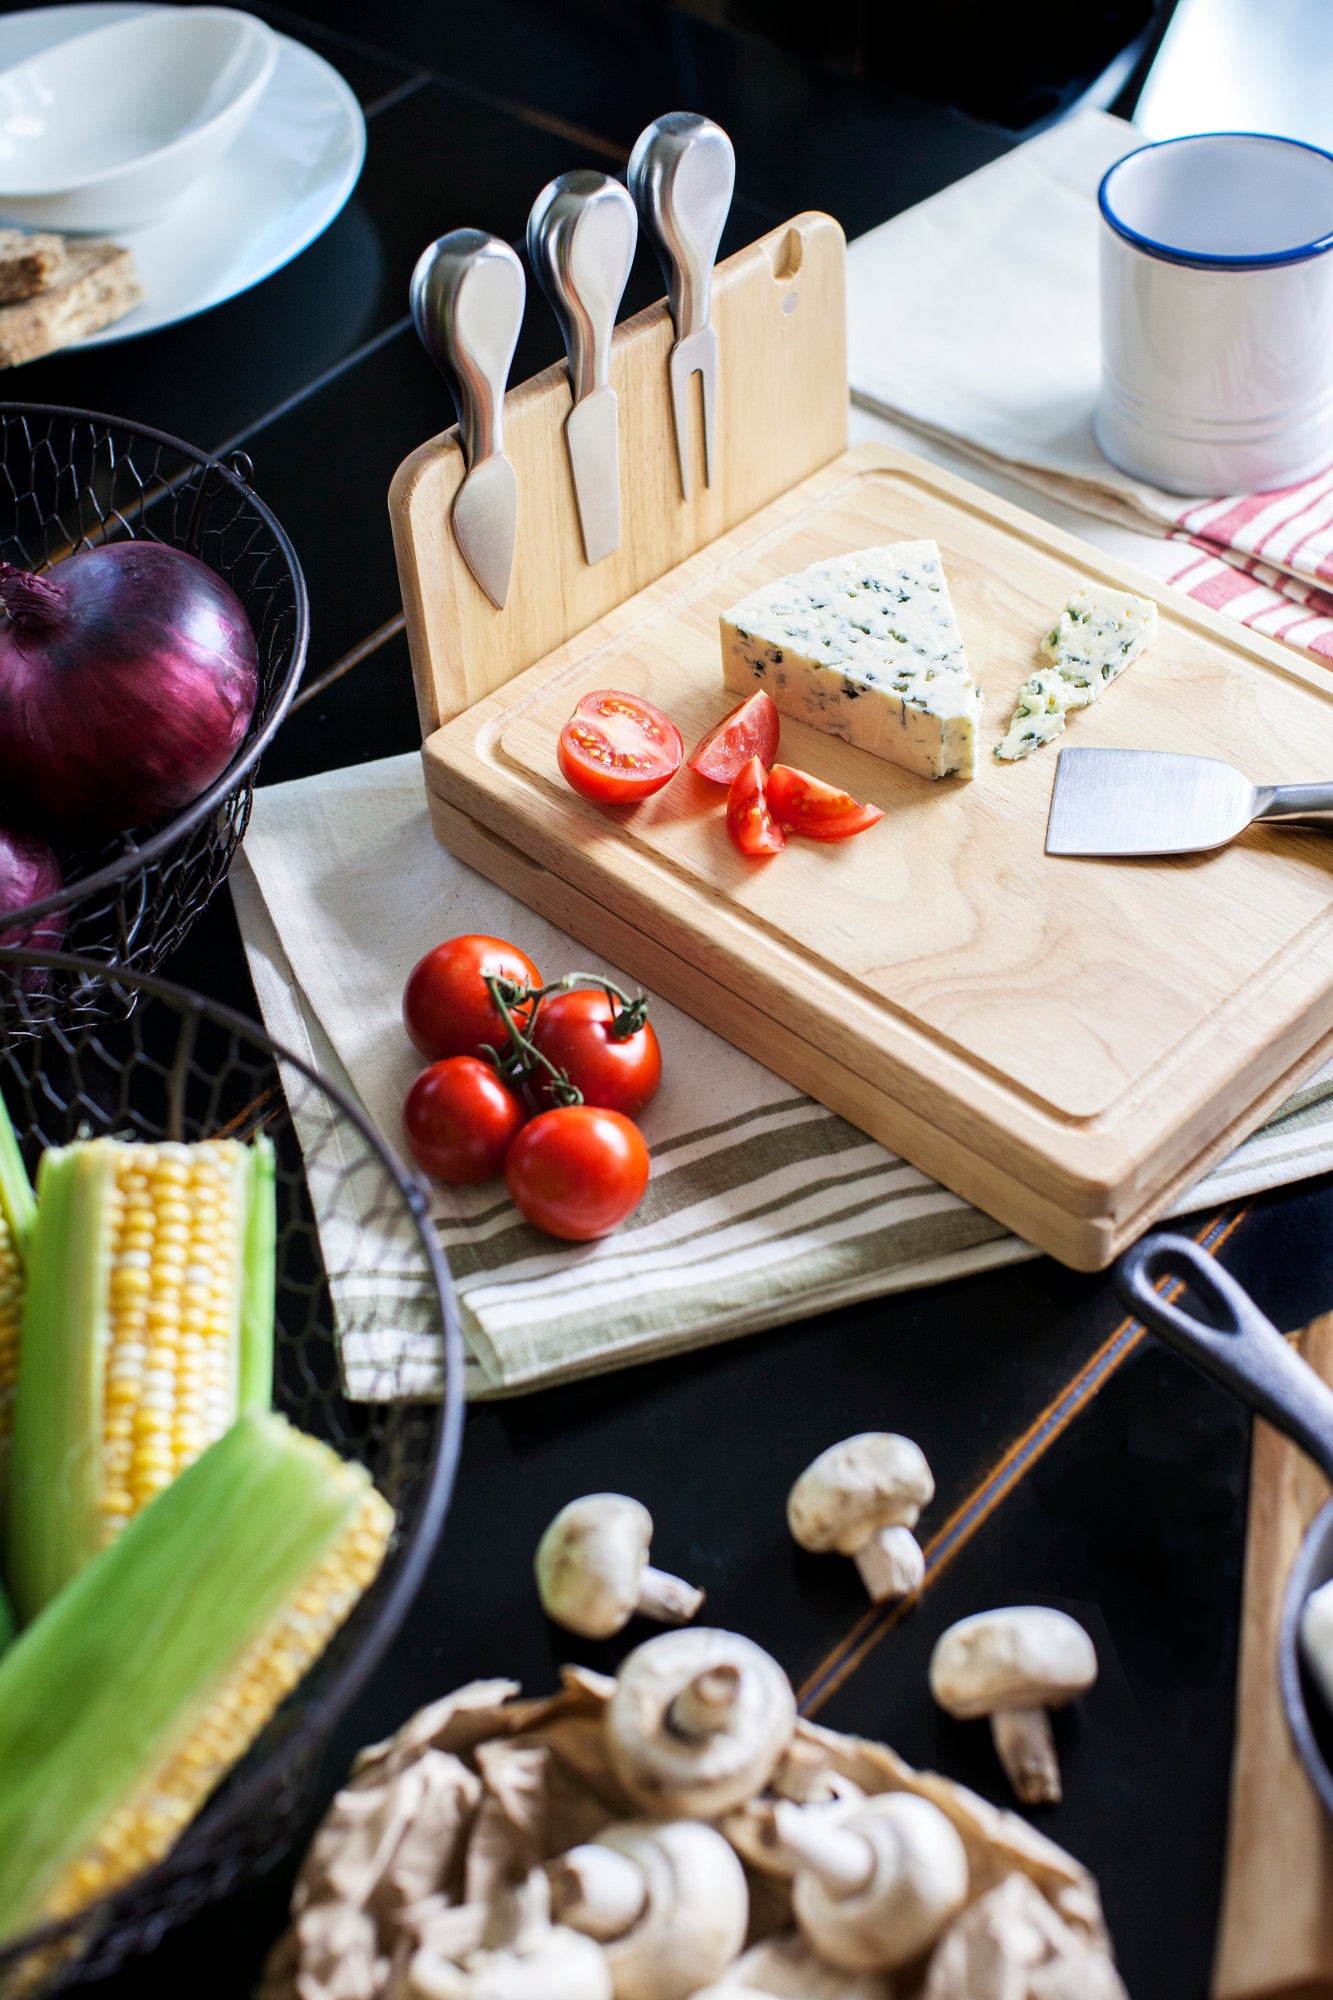 Cutting Boards & Knives - Shop Kitchen